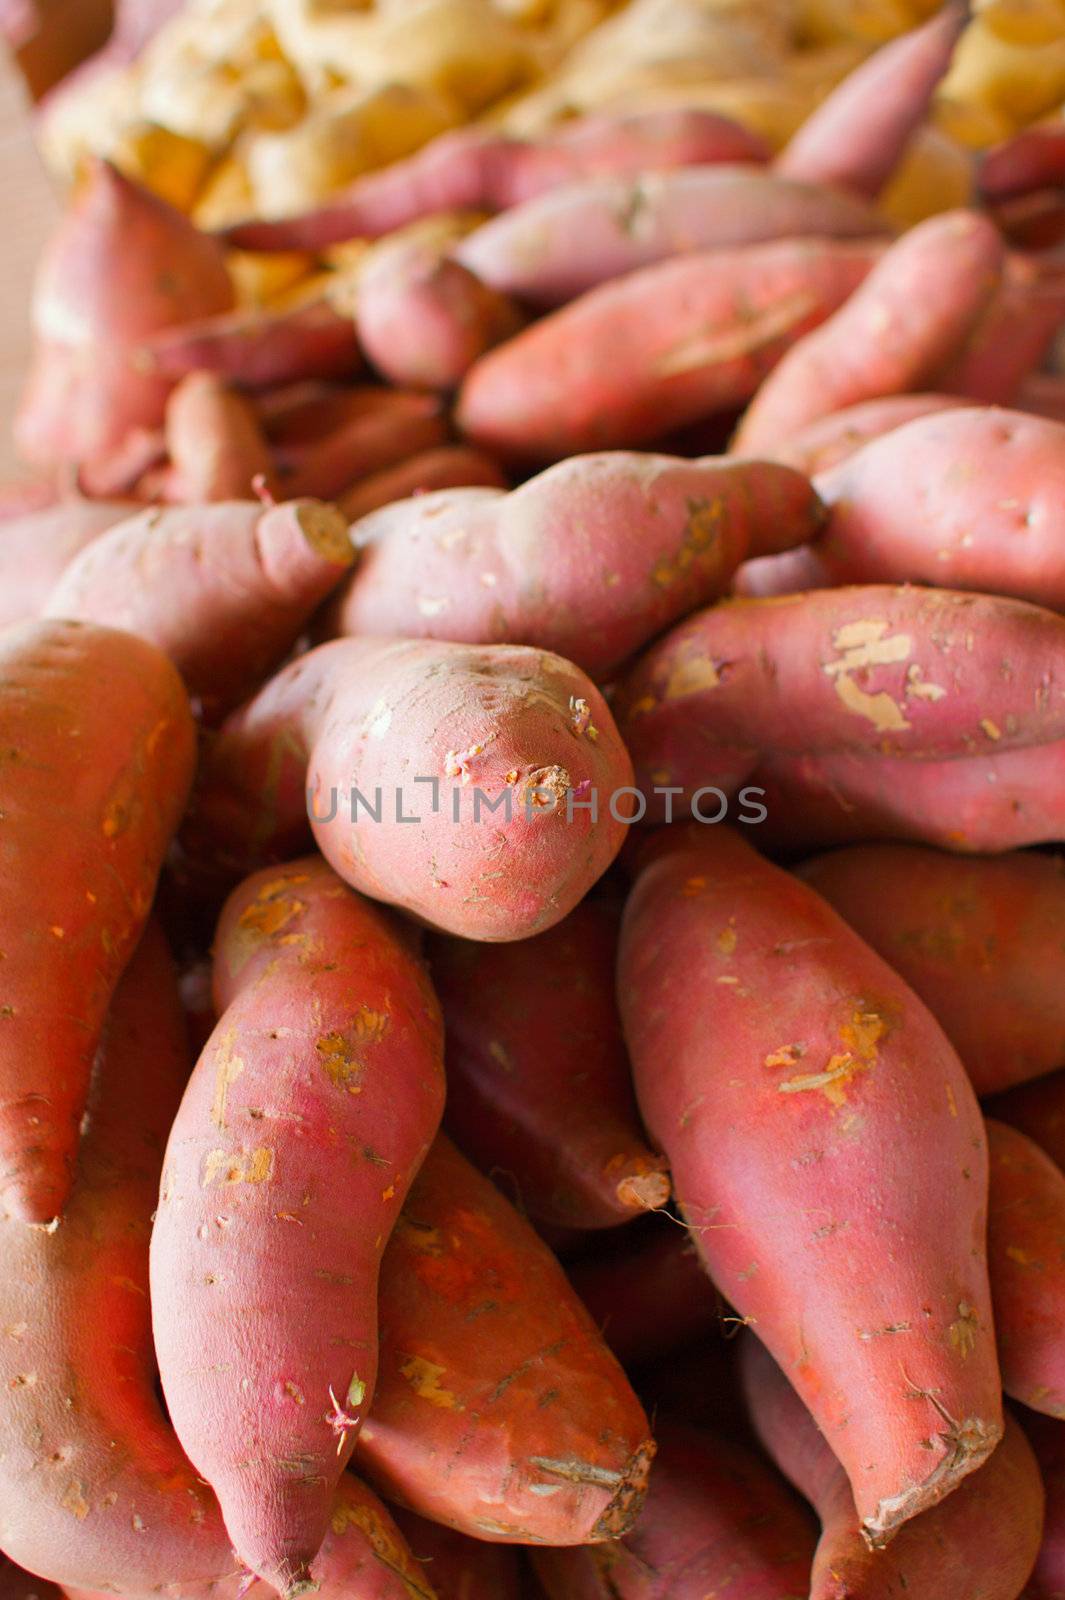 a big pile of orange and golden sweet potatoes at the farmers market